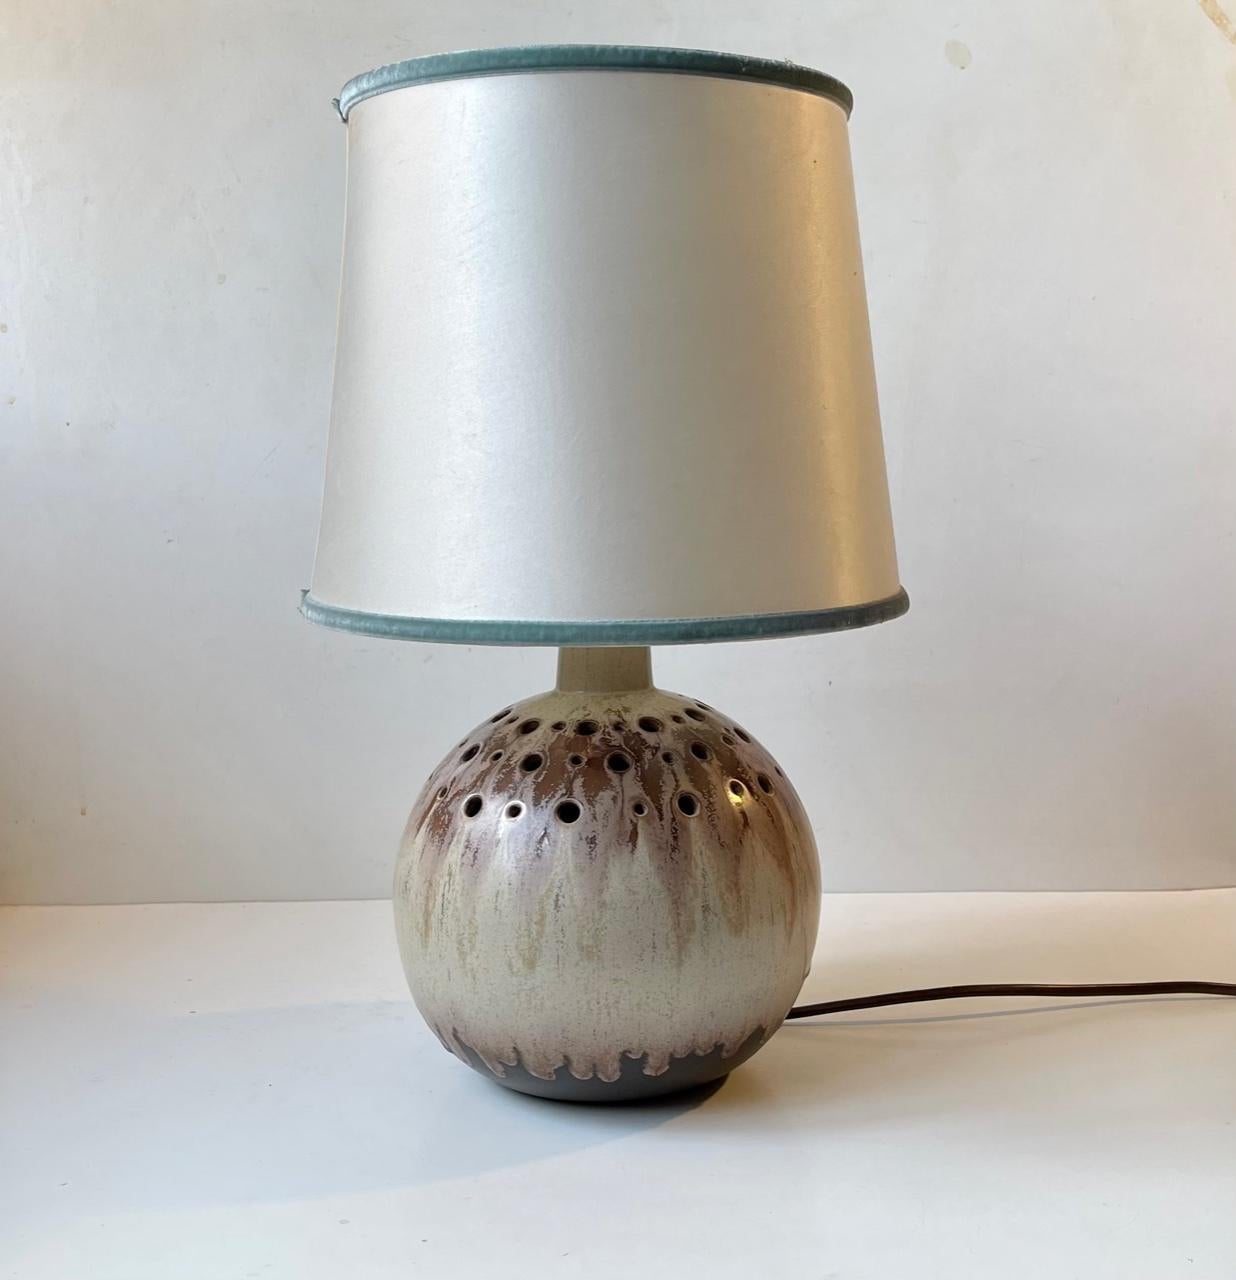 Large Spherical ceramic table light decorated with earthy drip glazes. The light features a partially perforated corpus, shade holder and on/of switch to the cord. It was made in Denmark during the 1970s. The base is signed by an unidentified